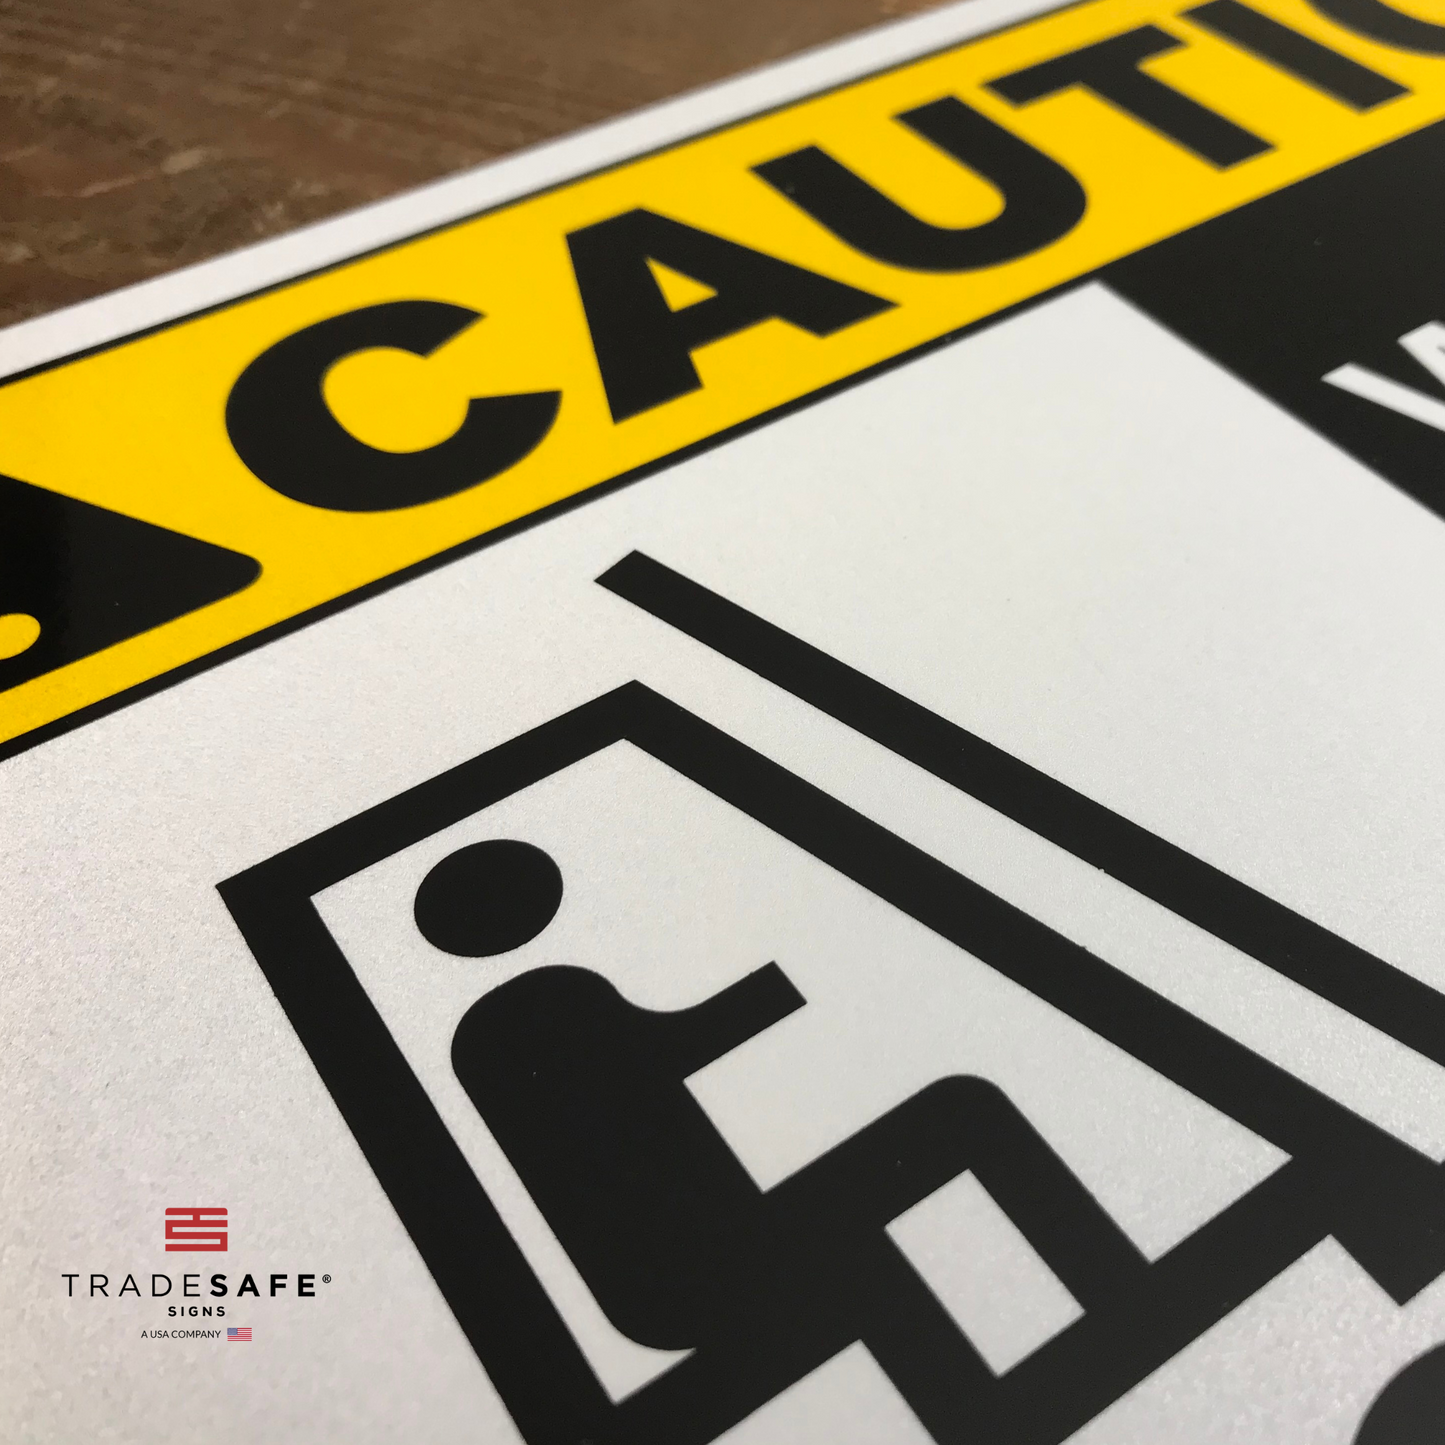 vibrant and highly visible forklift traffic sign